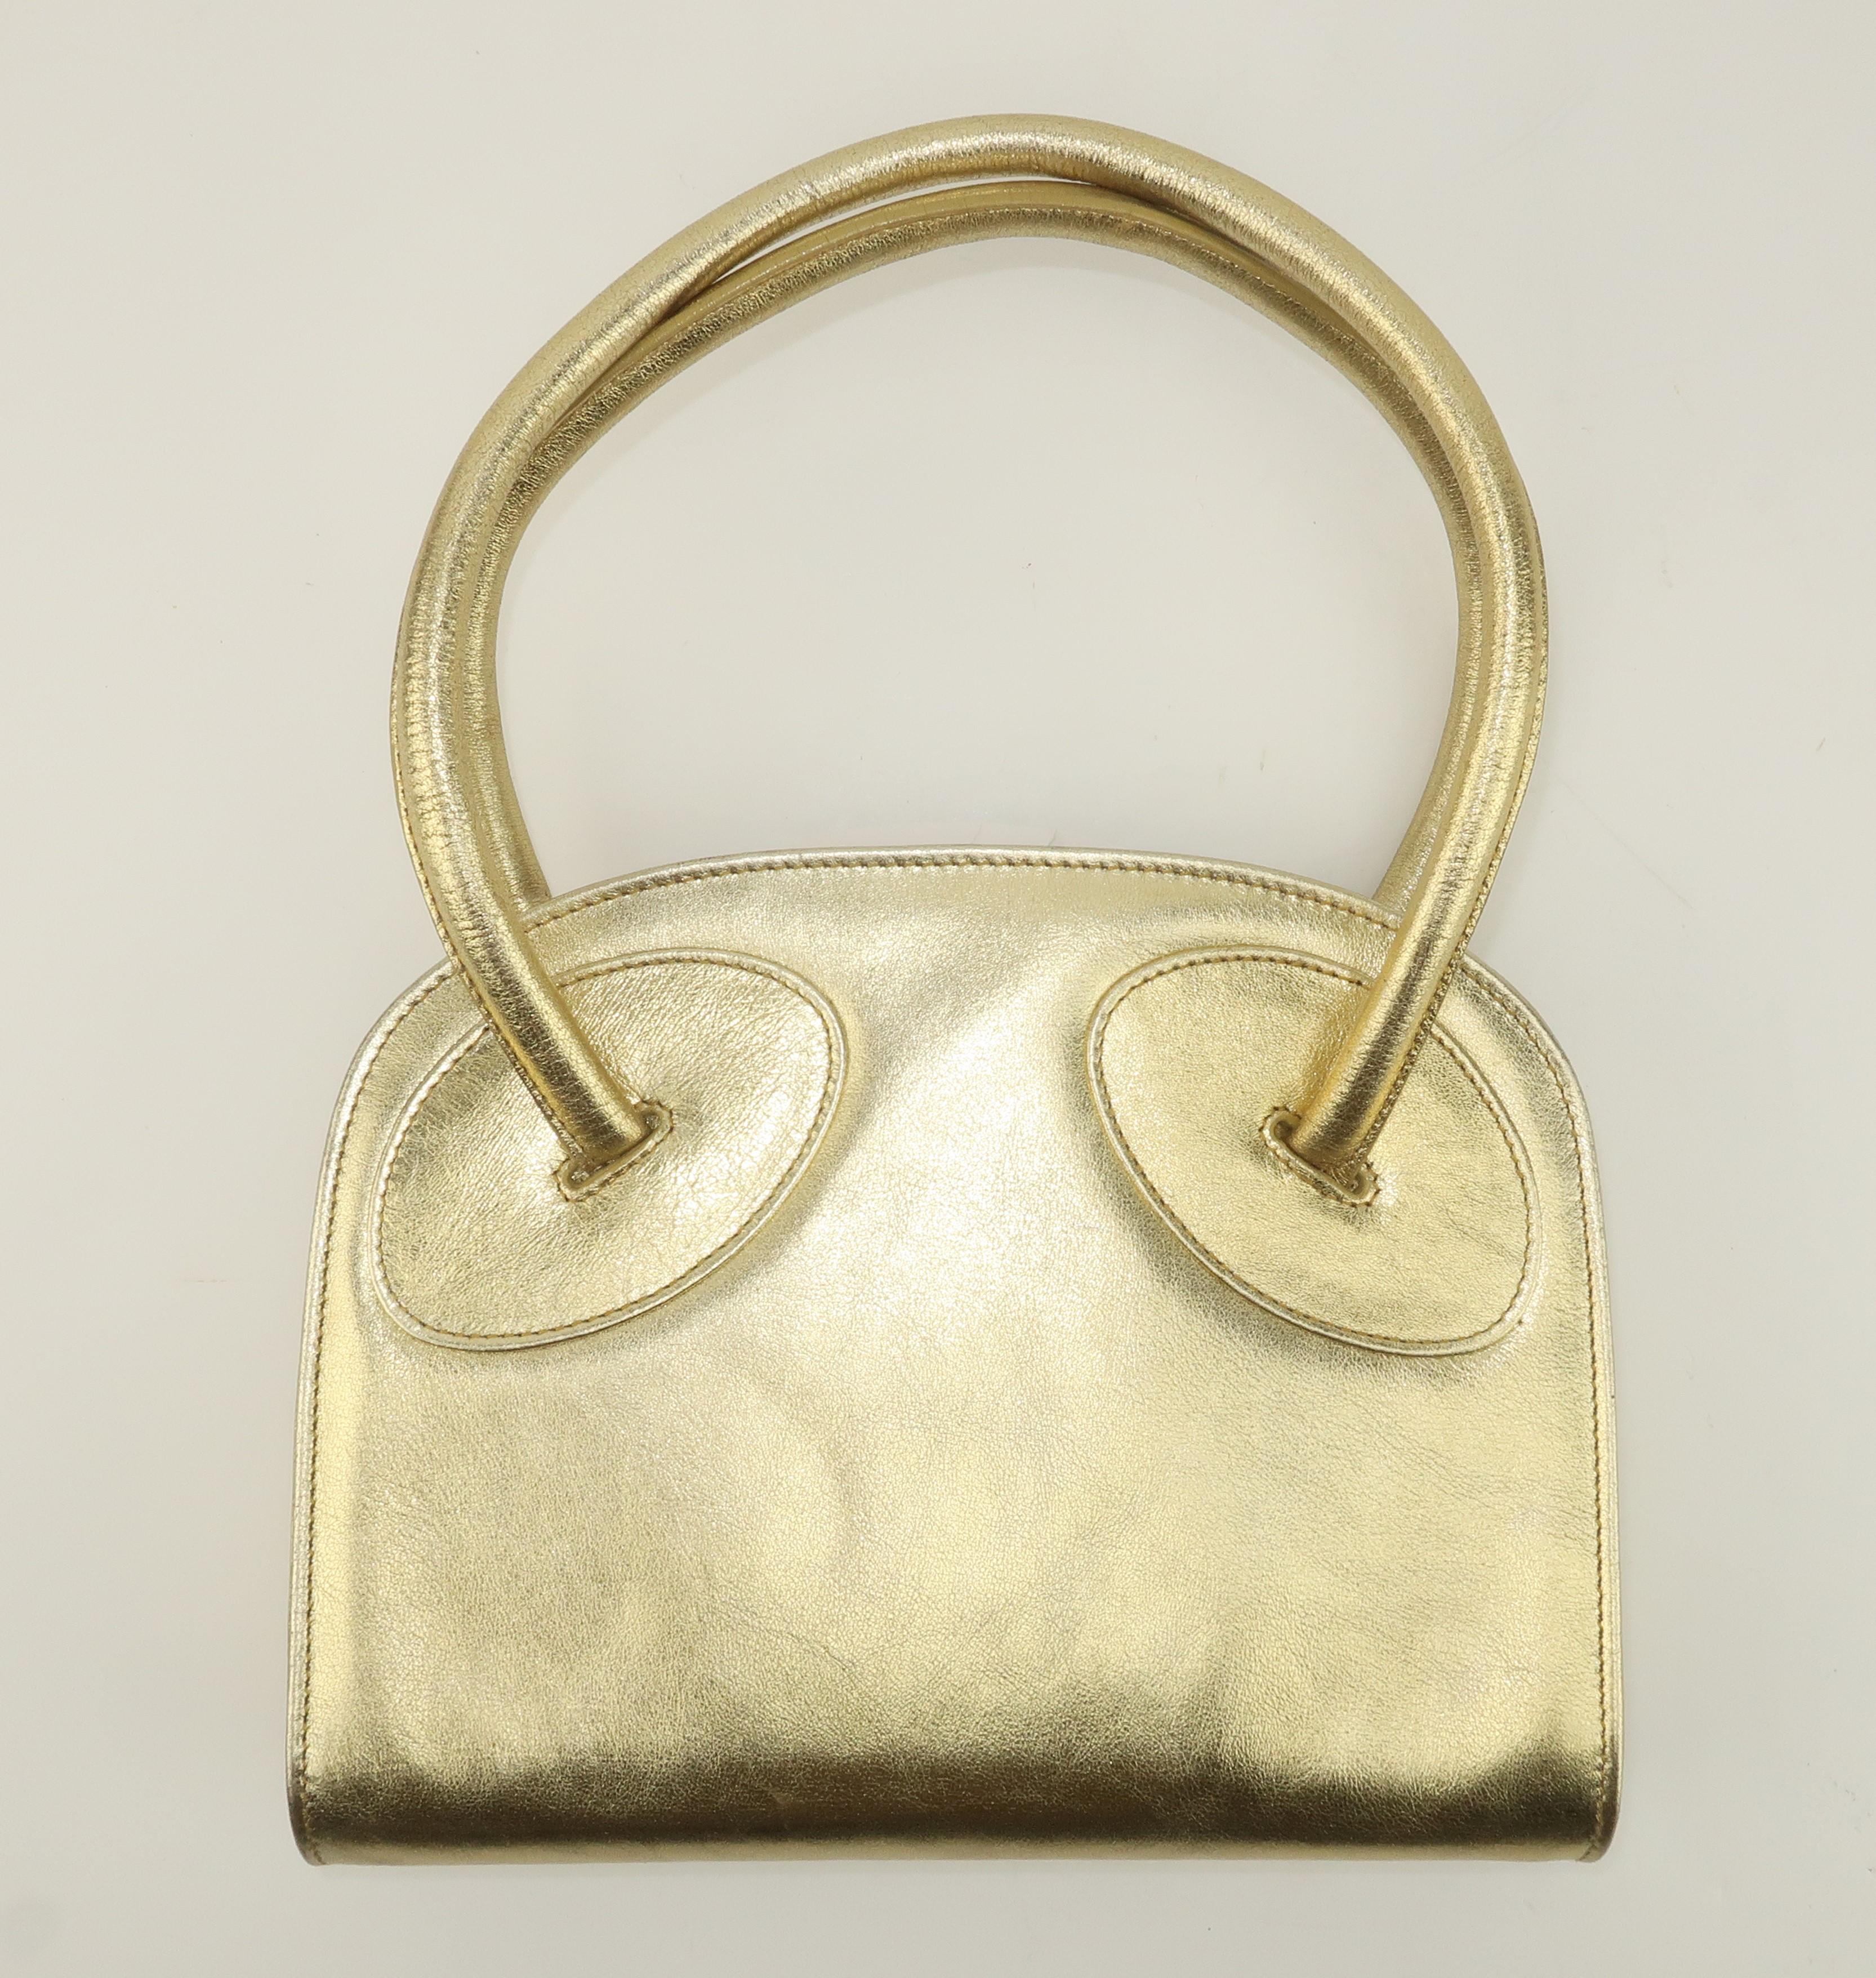 Glamorous gold ... Italian style!  This gold nugget is a 'carry anywhere and with everything' bag.  It is ostensibly an evening accessory but the effortlessly chic leather design would be the perfect pop to day wear, as well.  The 1970's silhouette